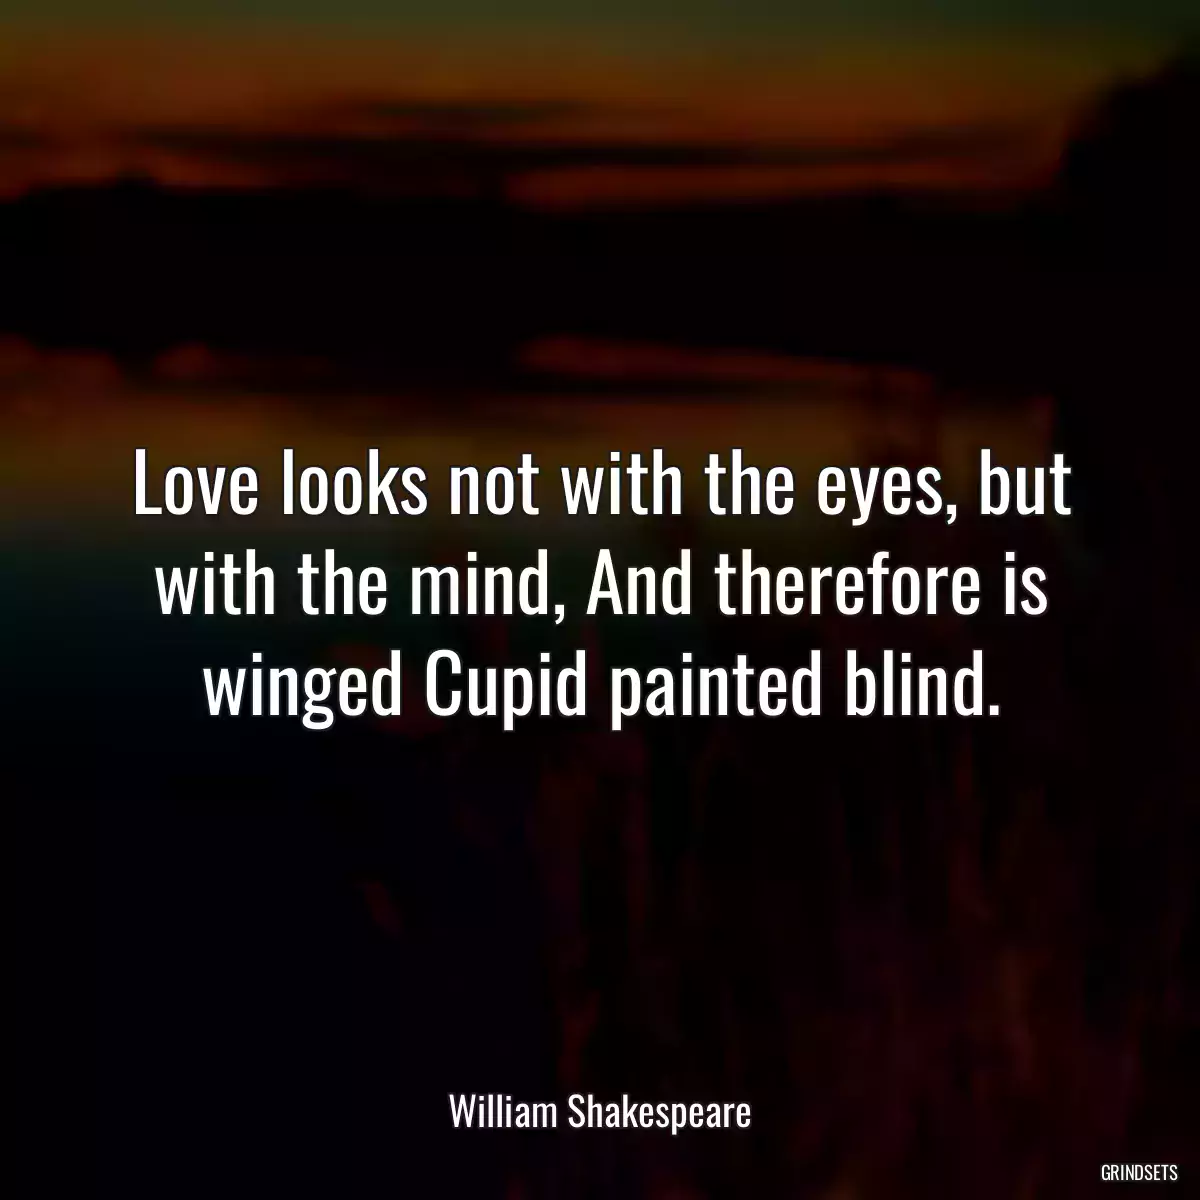 Love looks not with the eyes, but with the mind, And therefore is winged Cupid painted blind.